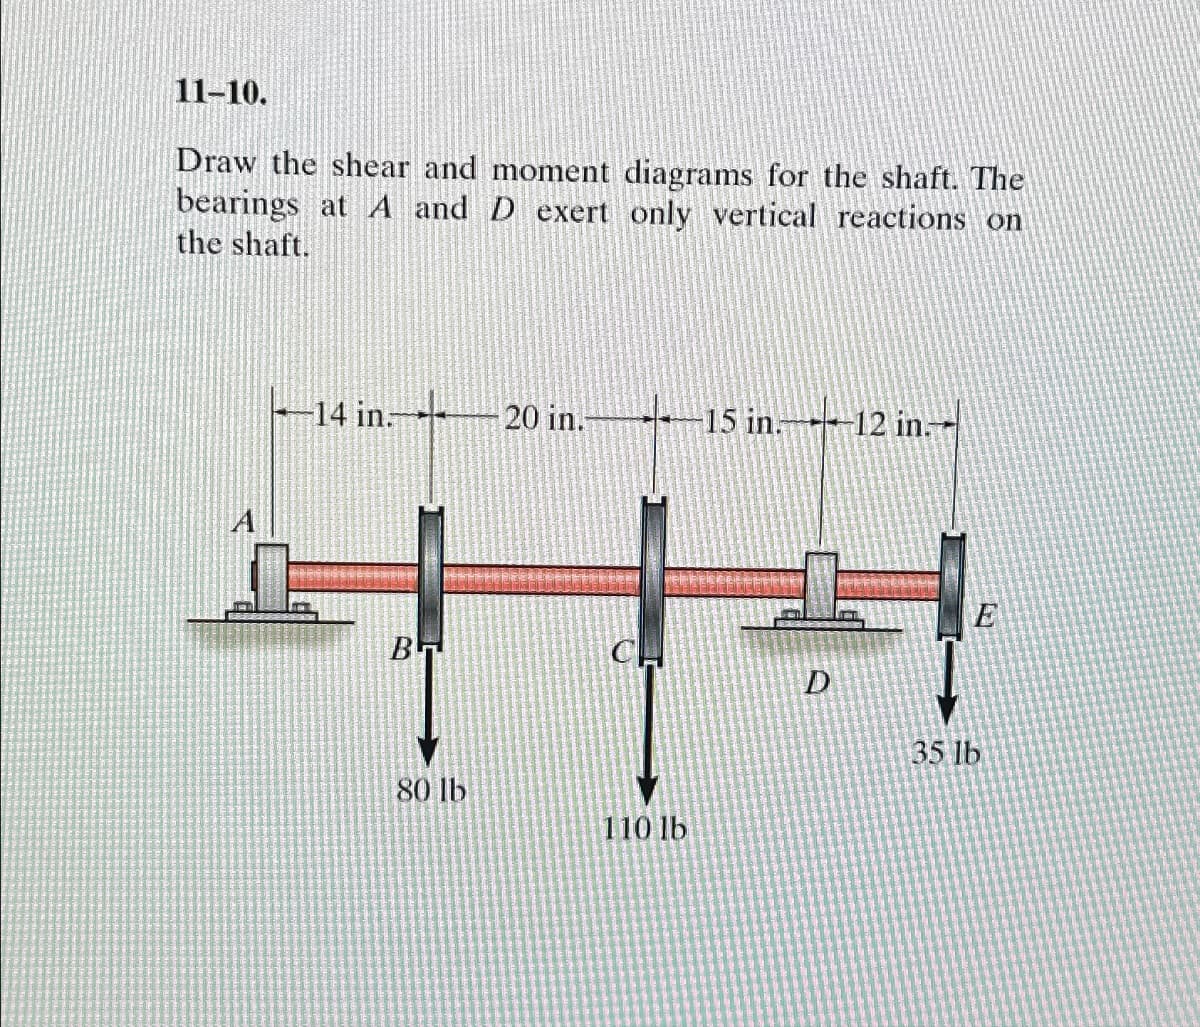 11-10.
Draw the shear and moment diagrams for the shaft. The
bearings at A and D exert only vertical reactions on
the shaft.
14 in.
20 in.
15 in.-12 in.
B
80 lb
110 lb
E
D
35 lb